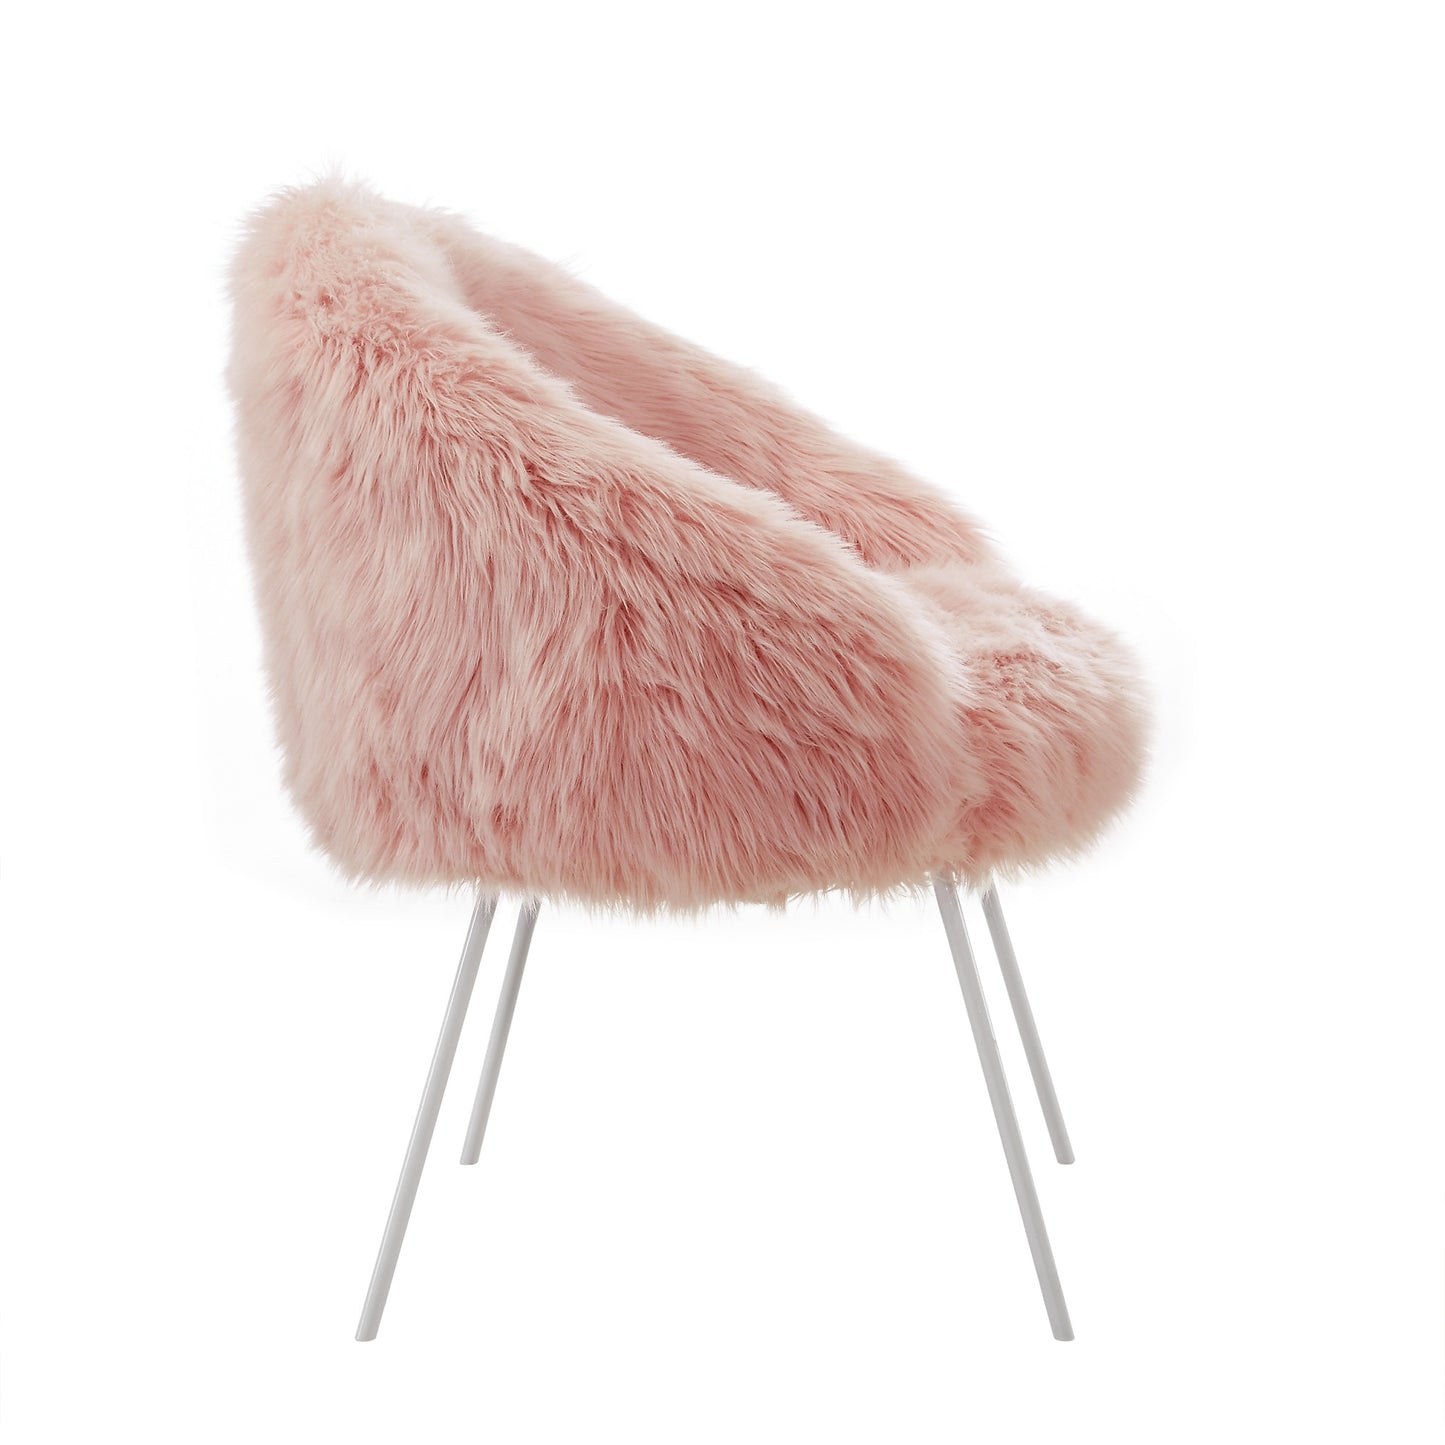 28" Rose And White Faux Fur Arm Chair